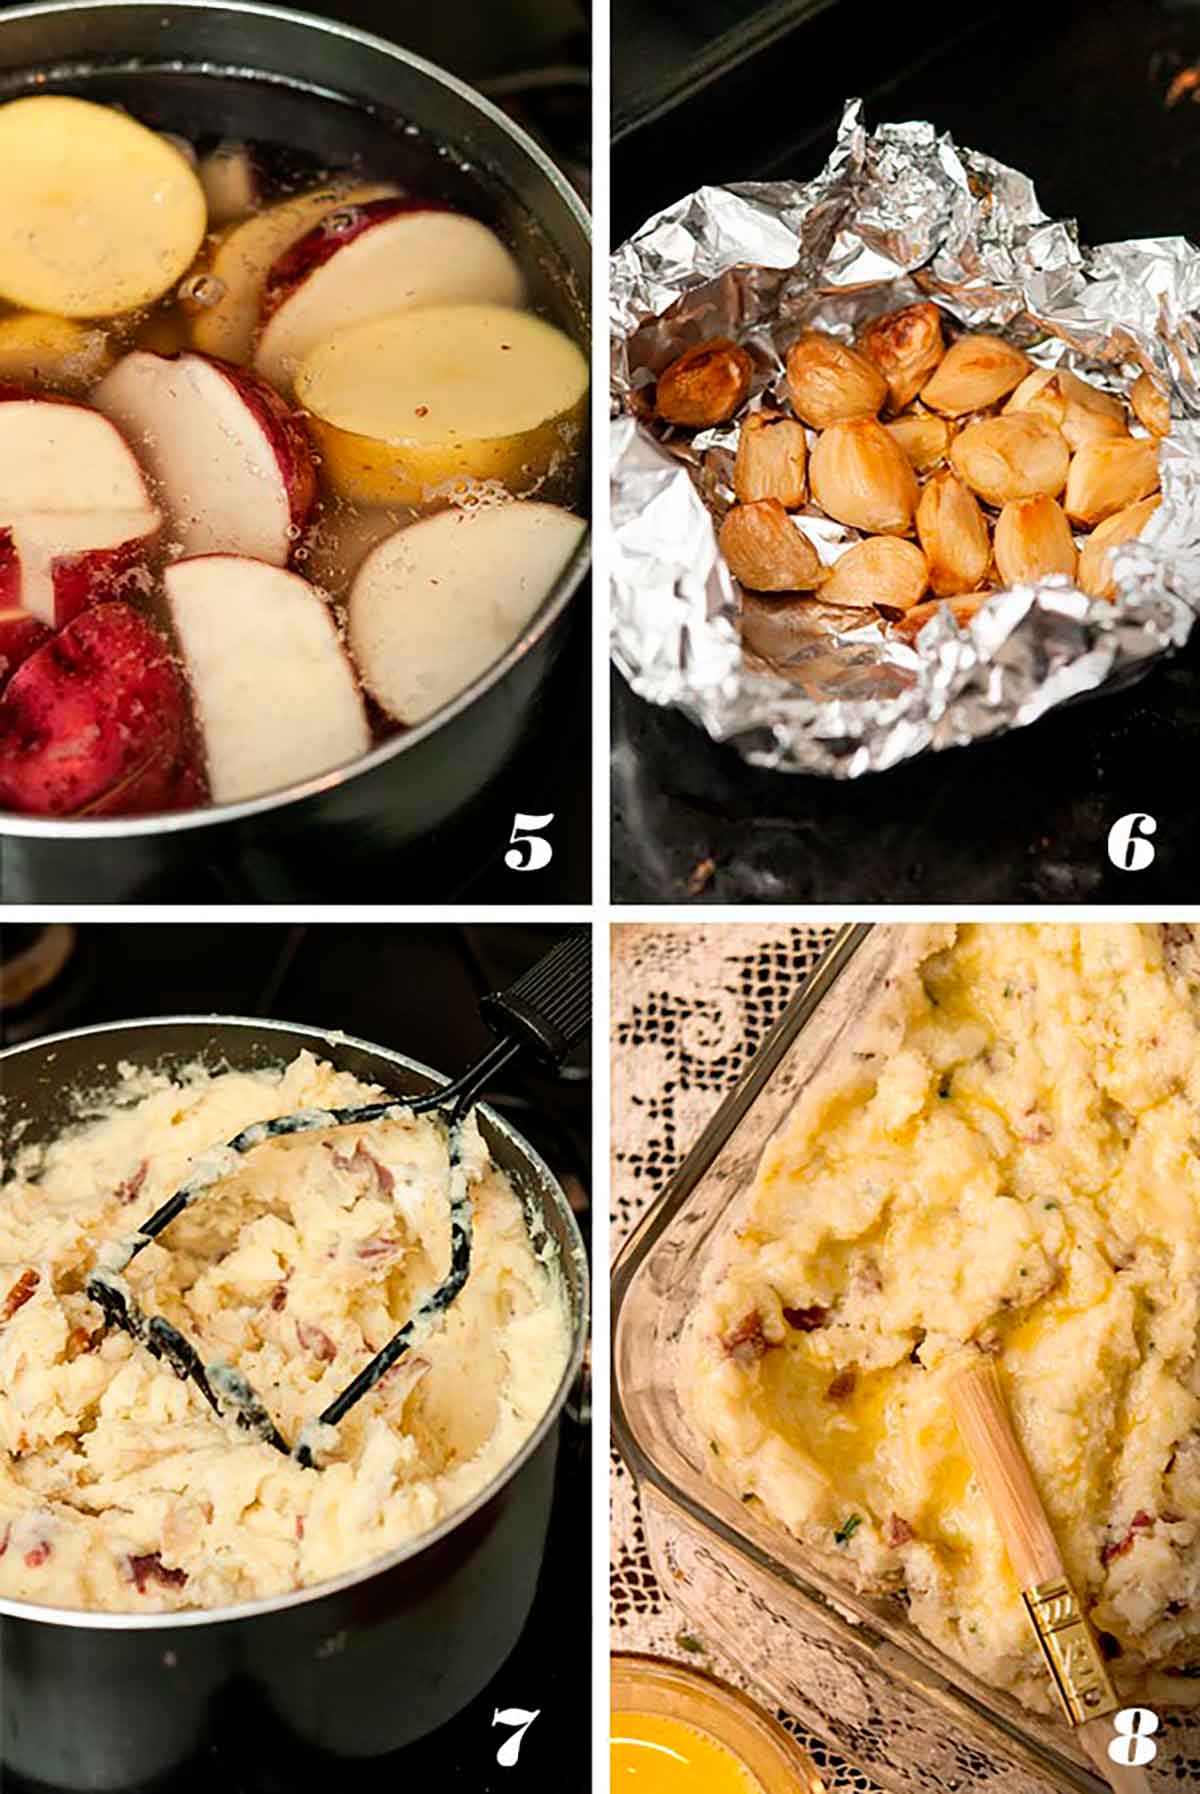 A collage of 4 numbered images showing how to make baked mashed potatoes.